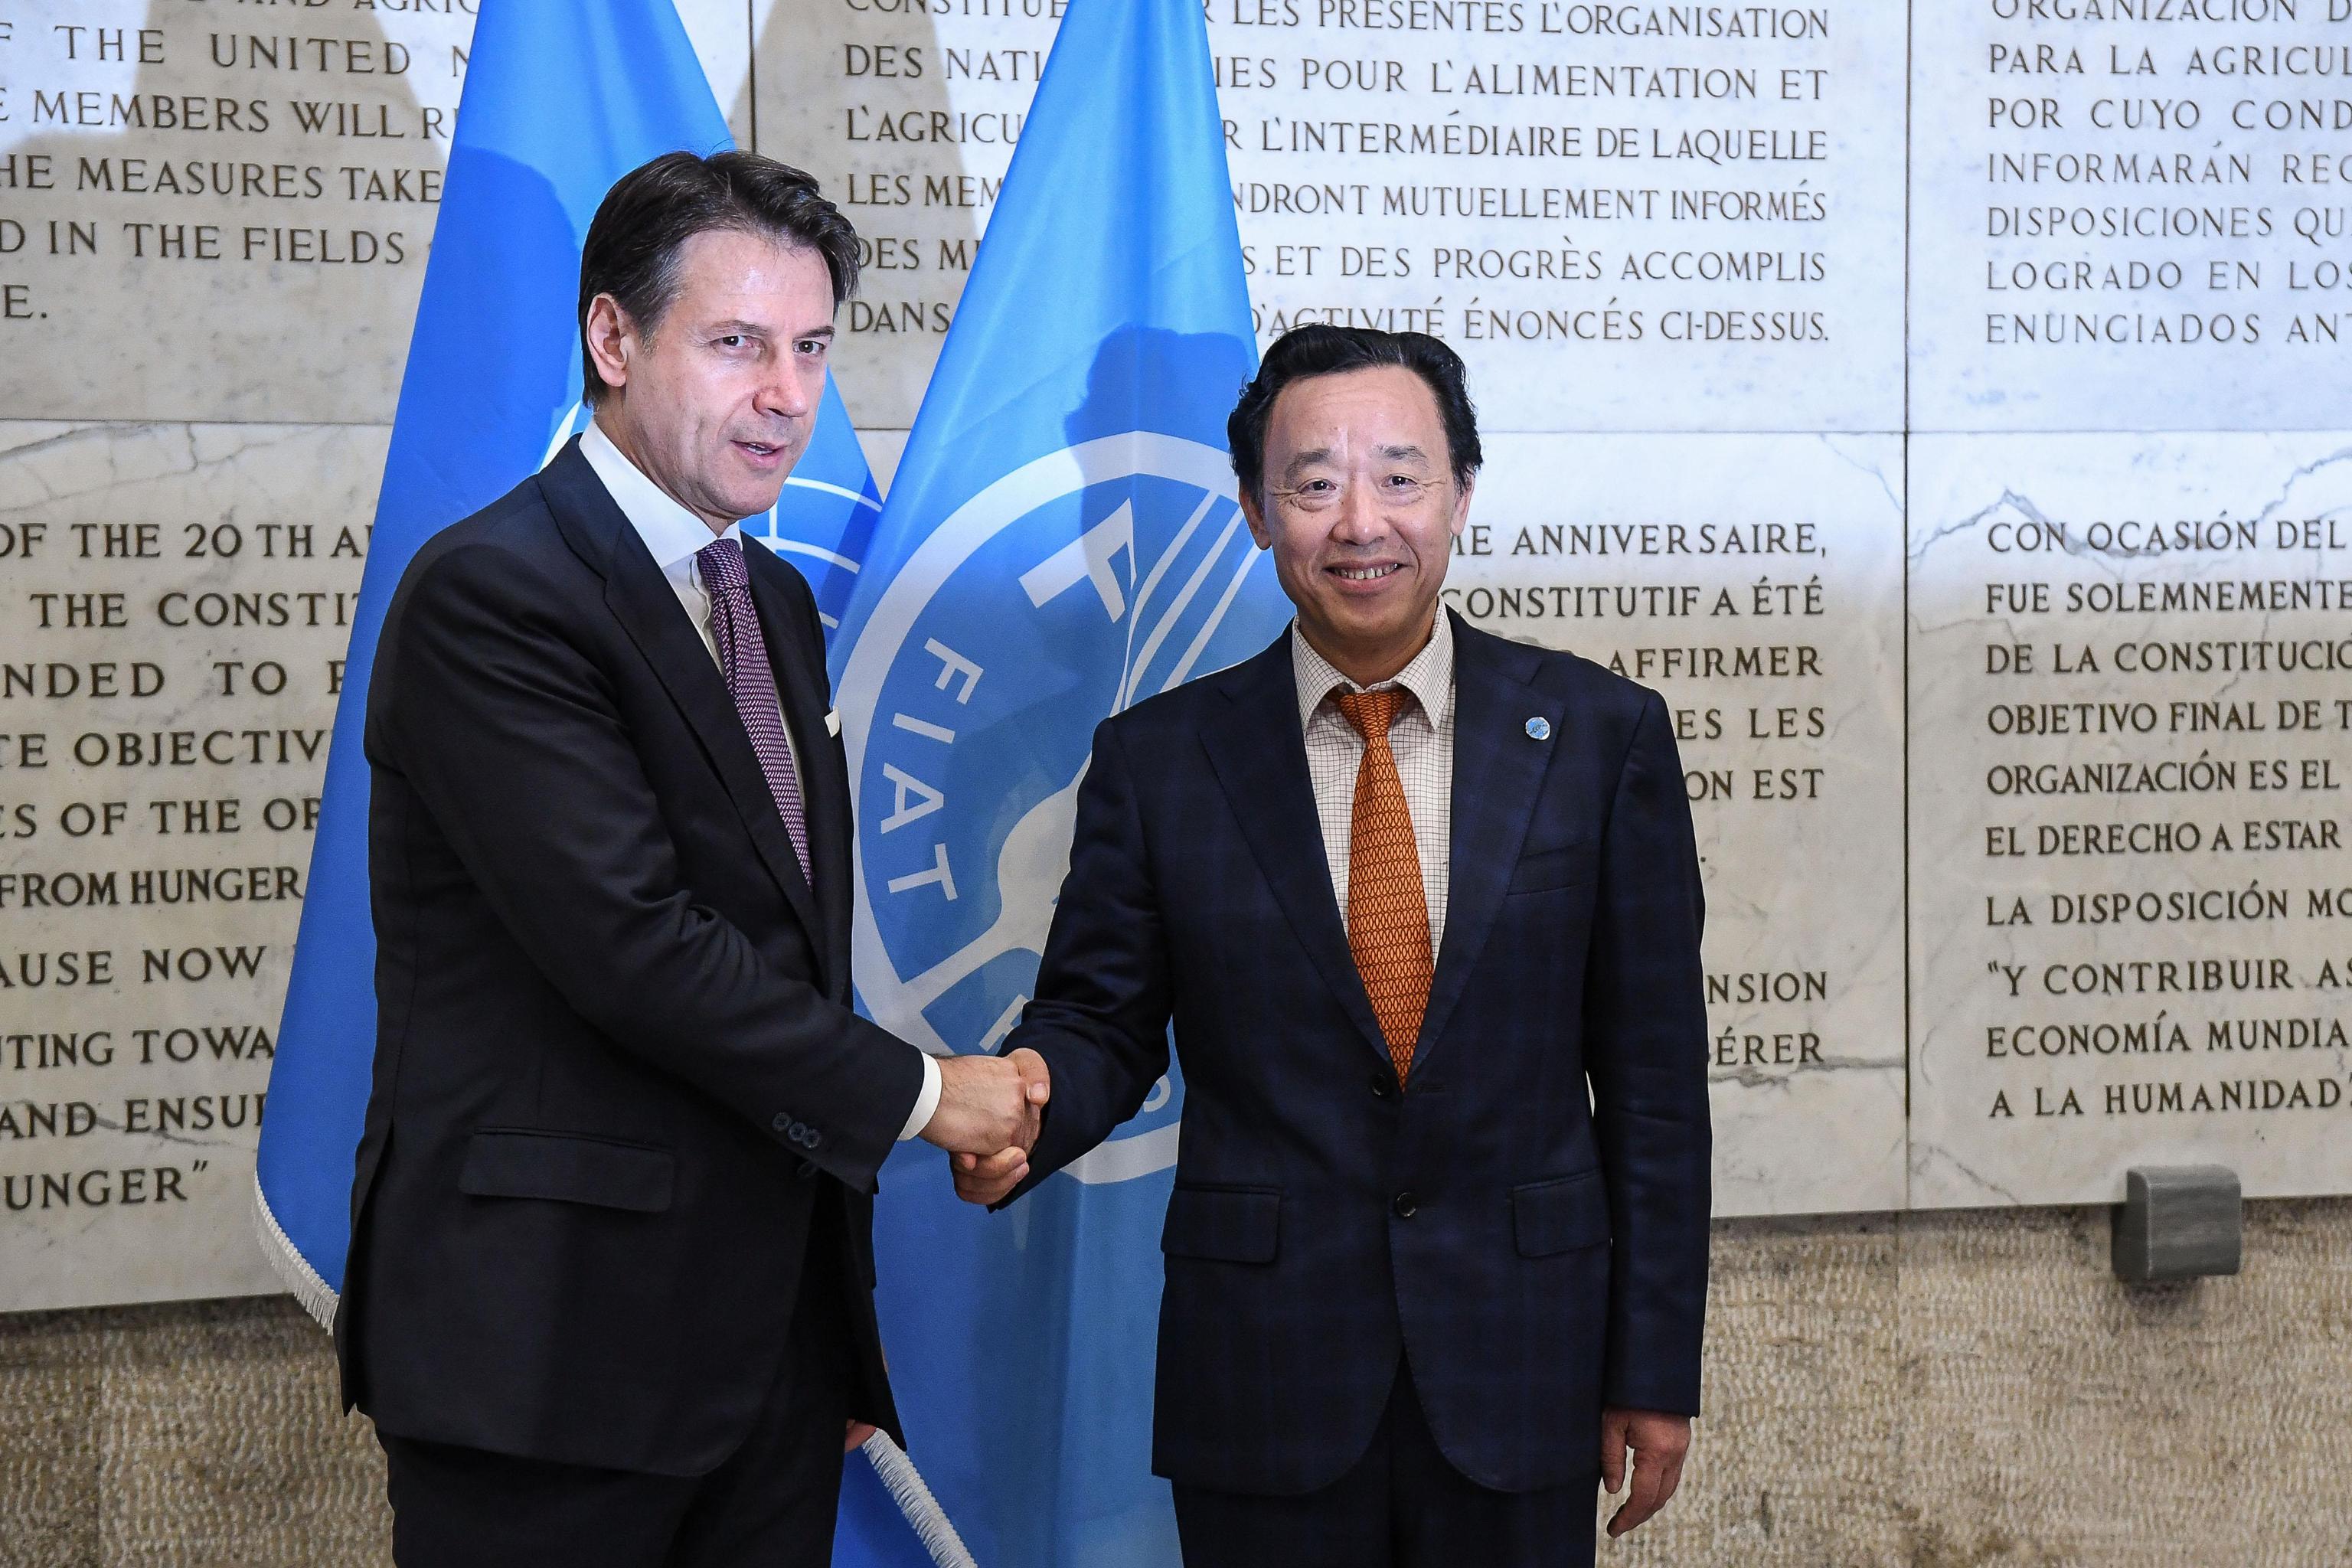 FAO Director General Qu Dongyu (R) and Italian Premier Giuseppe Conte (L) in the FAO, United Nation's Food and Agriculture Organization headquarter, during the World Food Day Wednesday, Rome, Italy 6 October 2019.
ANSA/ALESSANDRO DI MEO